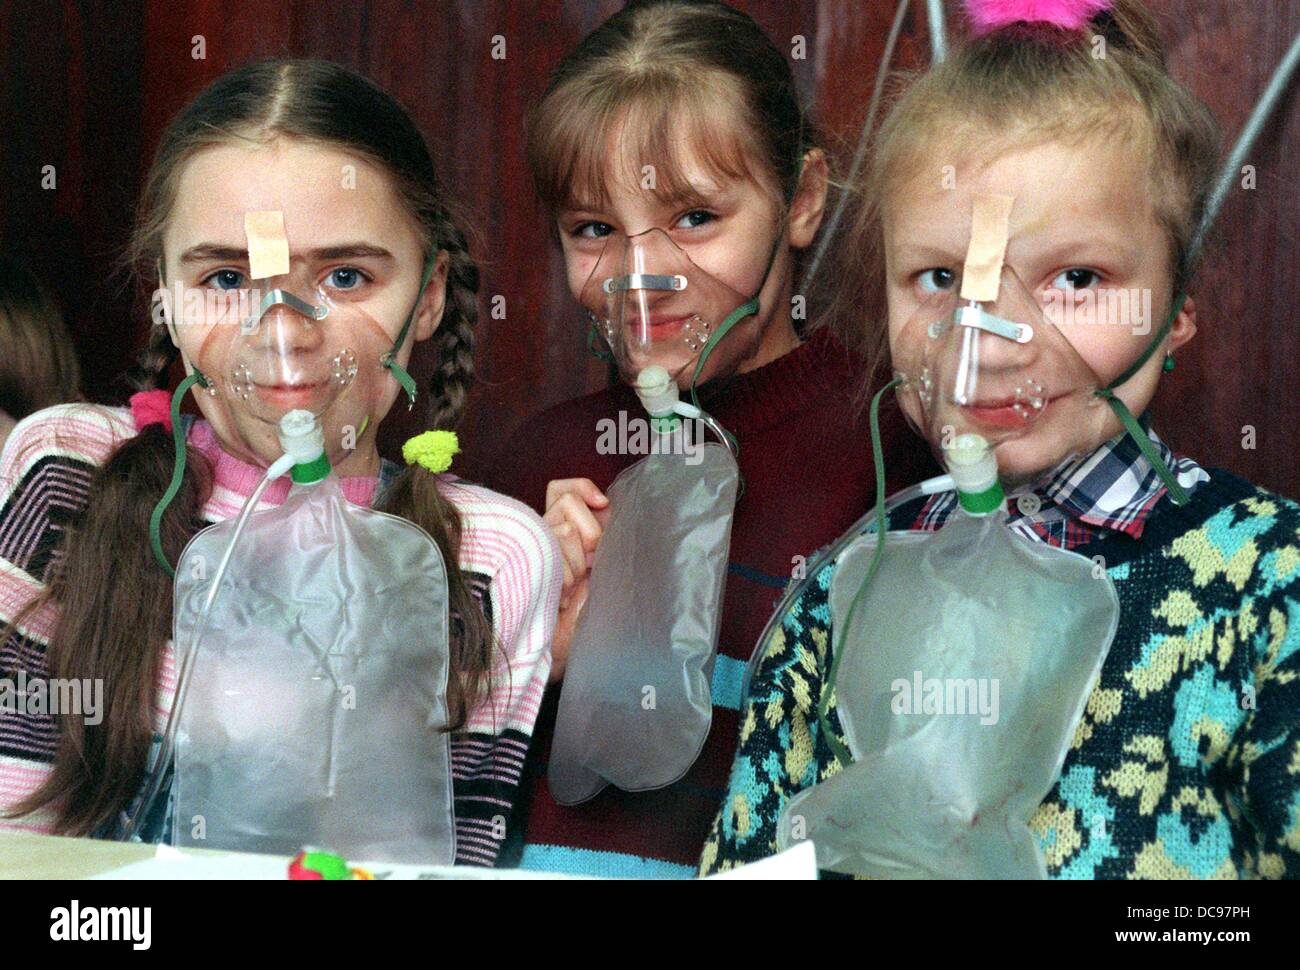 Wiga, Ina and Veronika (l-r) from Chernobyl are treated in a hospital in Leipzig, because their health had been damaged severly by the reactor accident in Chernobyl in May 1986 (picture from the 10th of May in 1991). Stock Photo